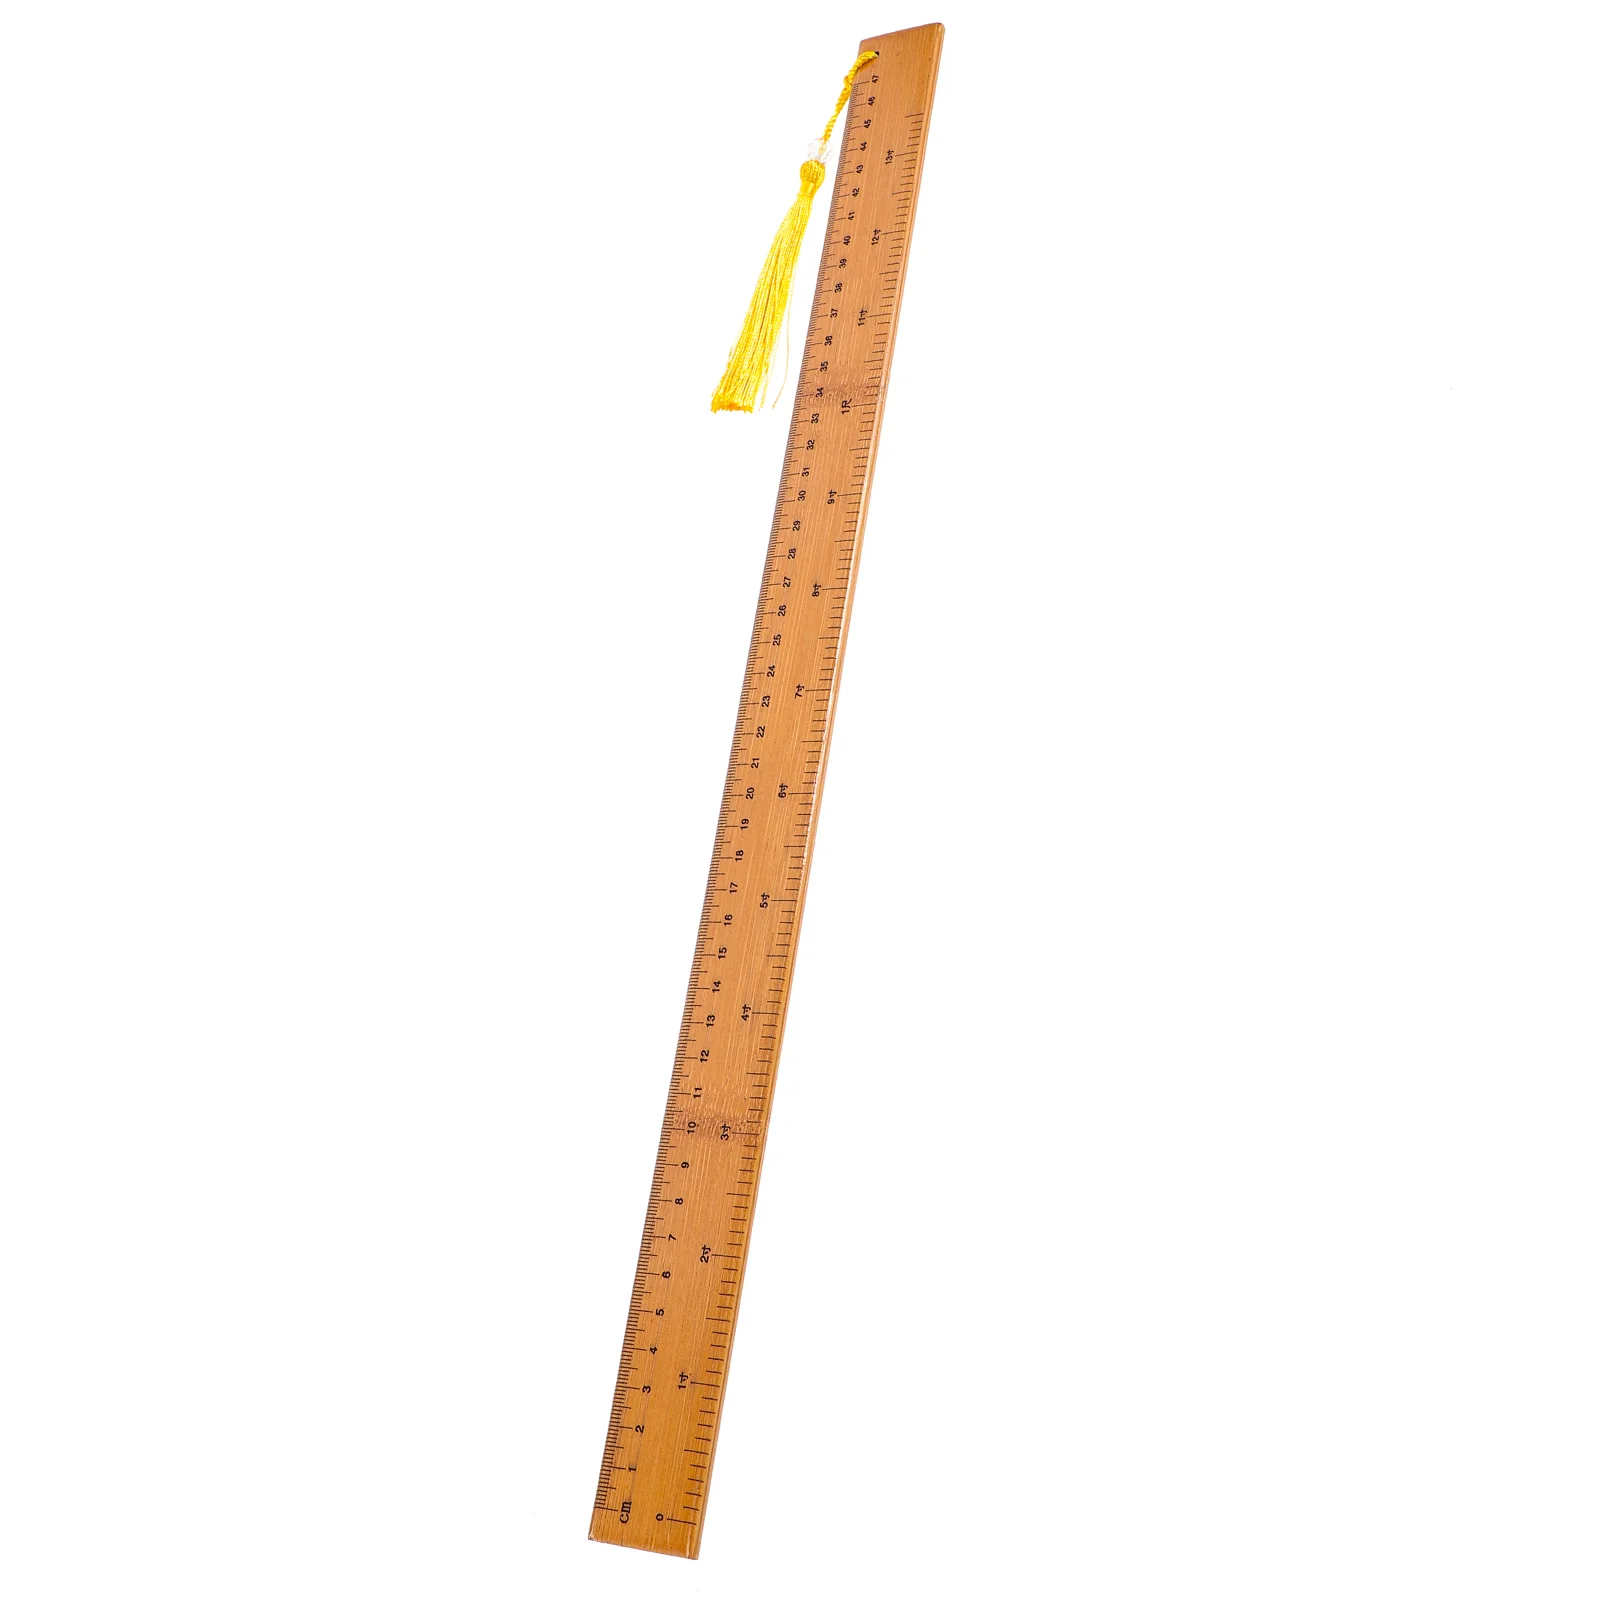 Household Straight Ruler Kids Ruler Measuring Bamboo Ruler Precise Student Ruler School Accessory Kids School Teaching Home electronic room thermometer hygrometer digital home temperature measuring instrument humidity display meter battery operated